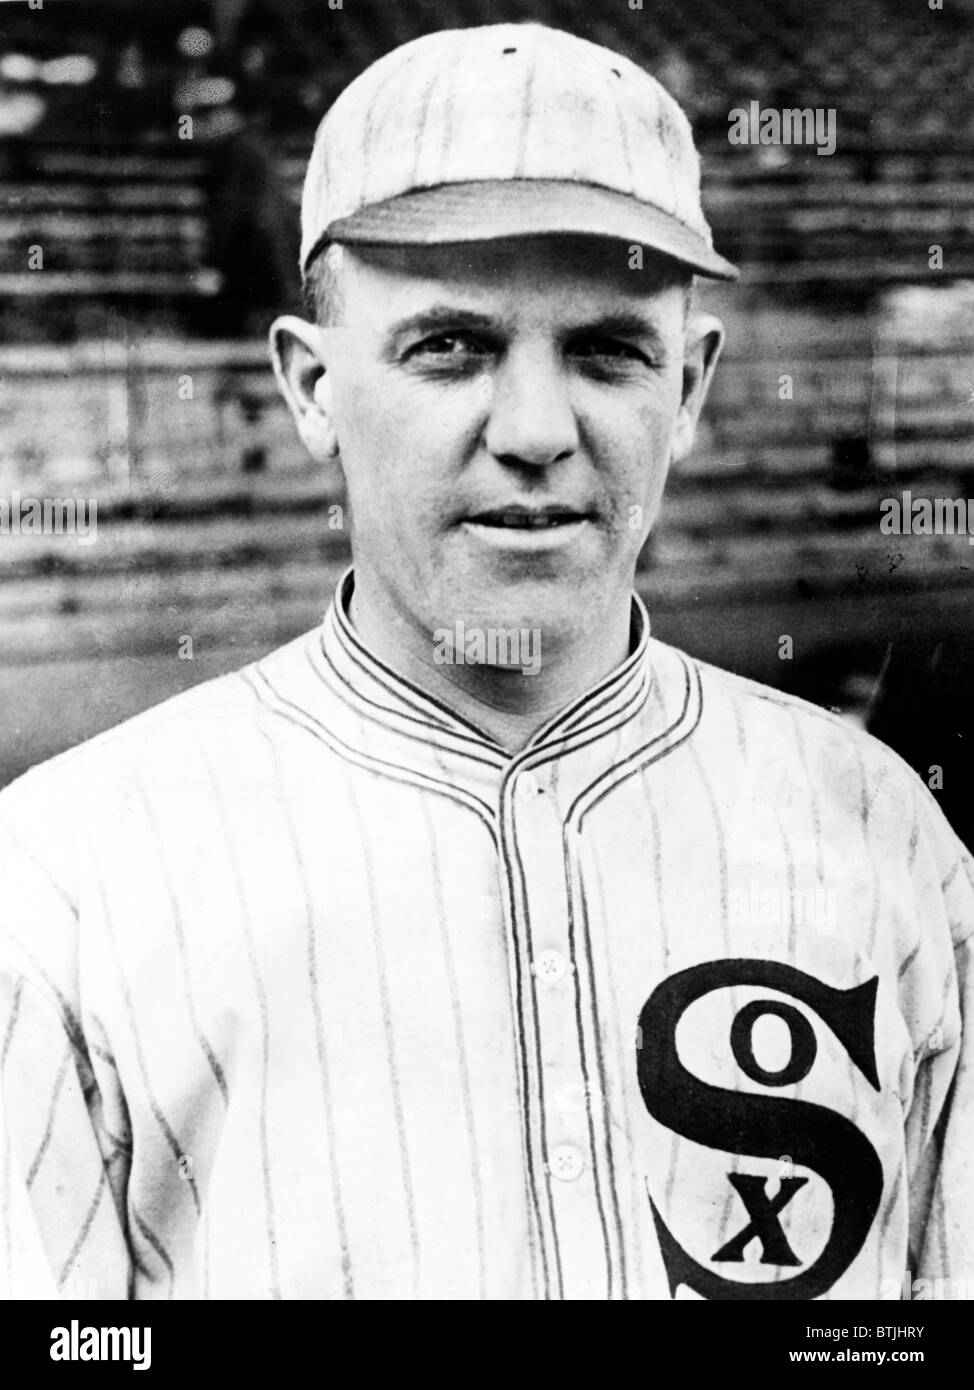 BASEBALL, Eddie Cicotte, pitcher & player for the Chicago White Sox baseball team, from 1912-1920. Stock Photo